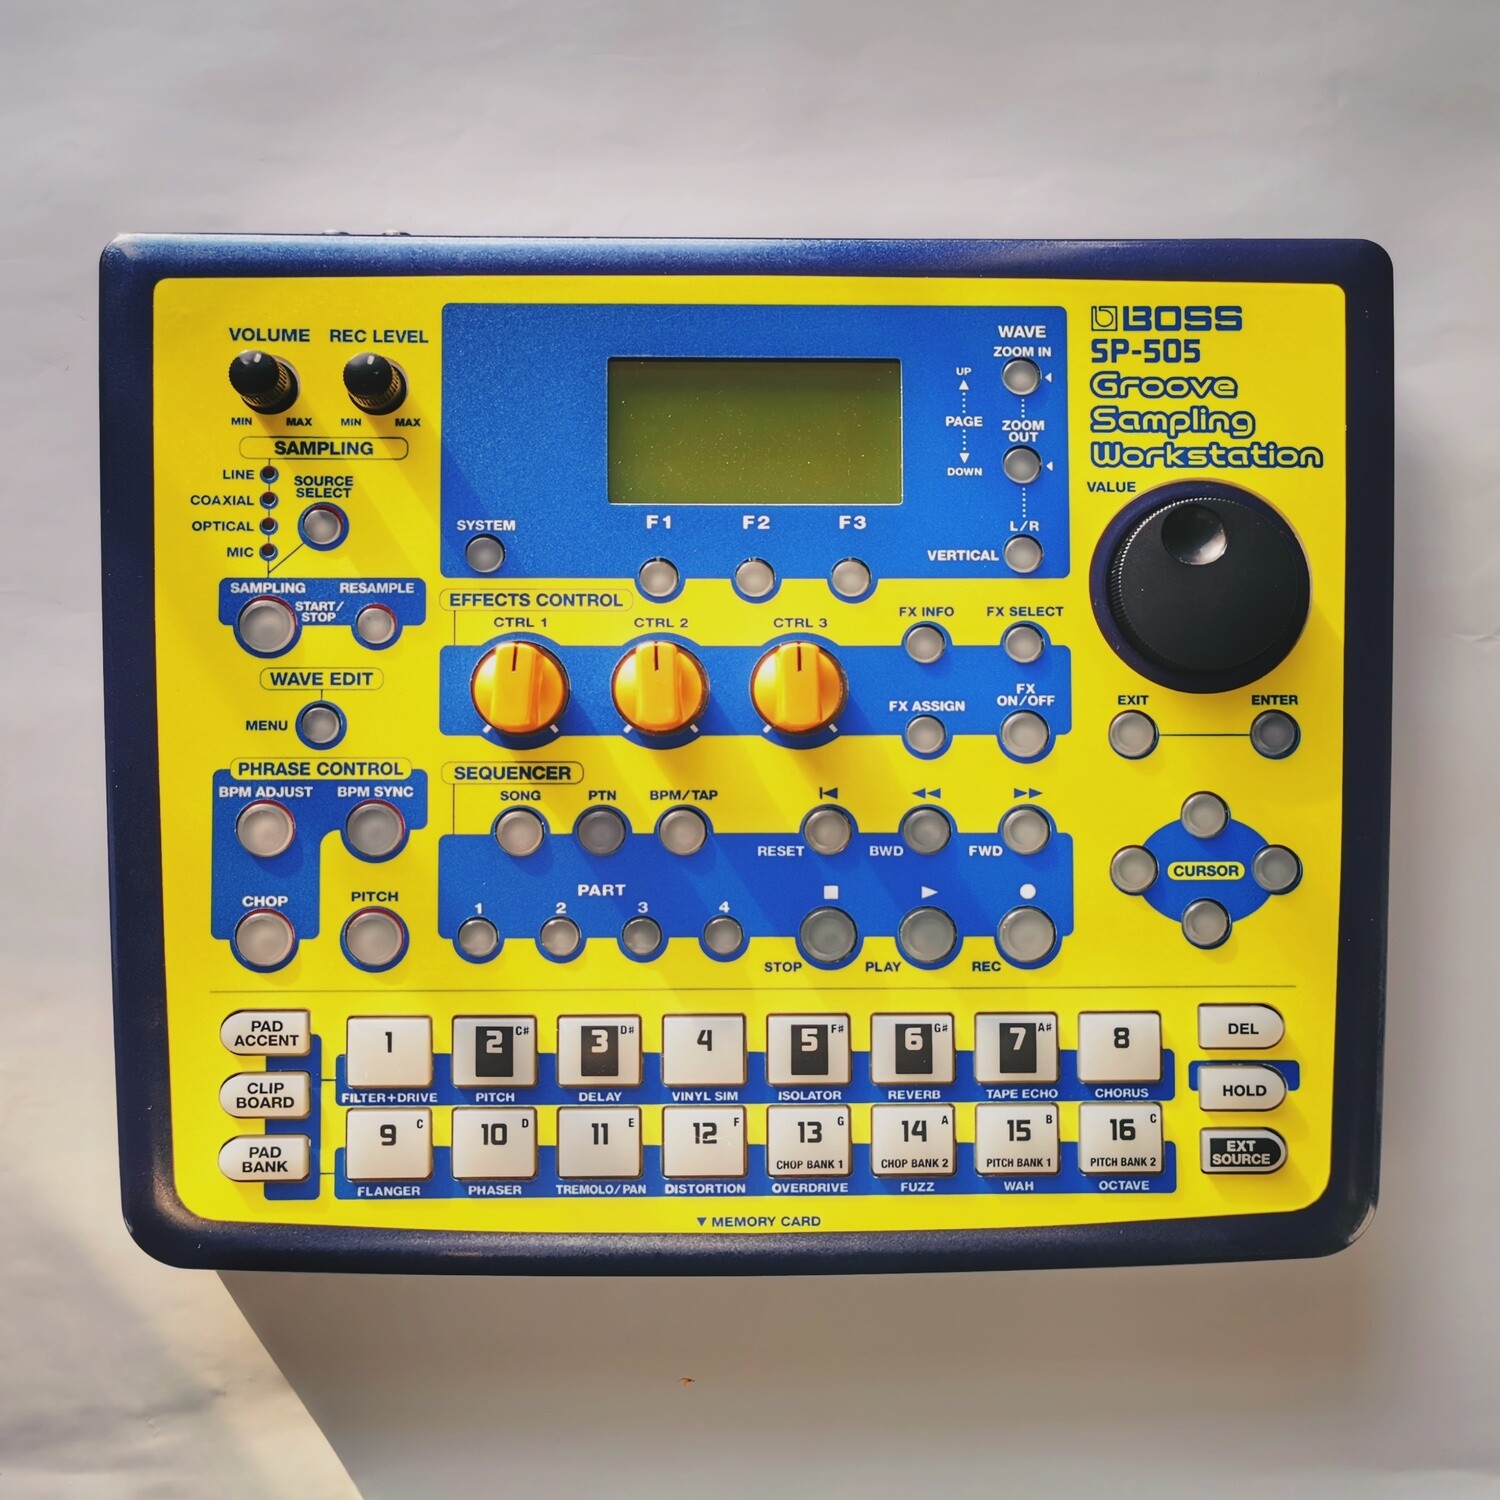 Vinyl skins for BOSS SP-505 (choose style), CHOOSE YOUR STYLE: YELLOW-BLUE